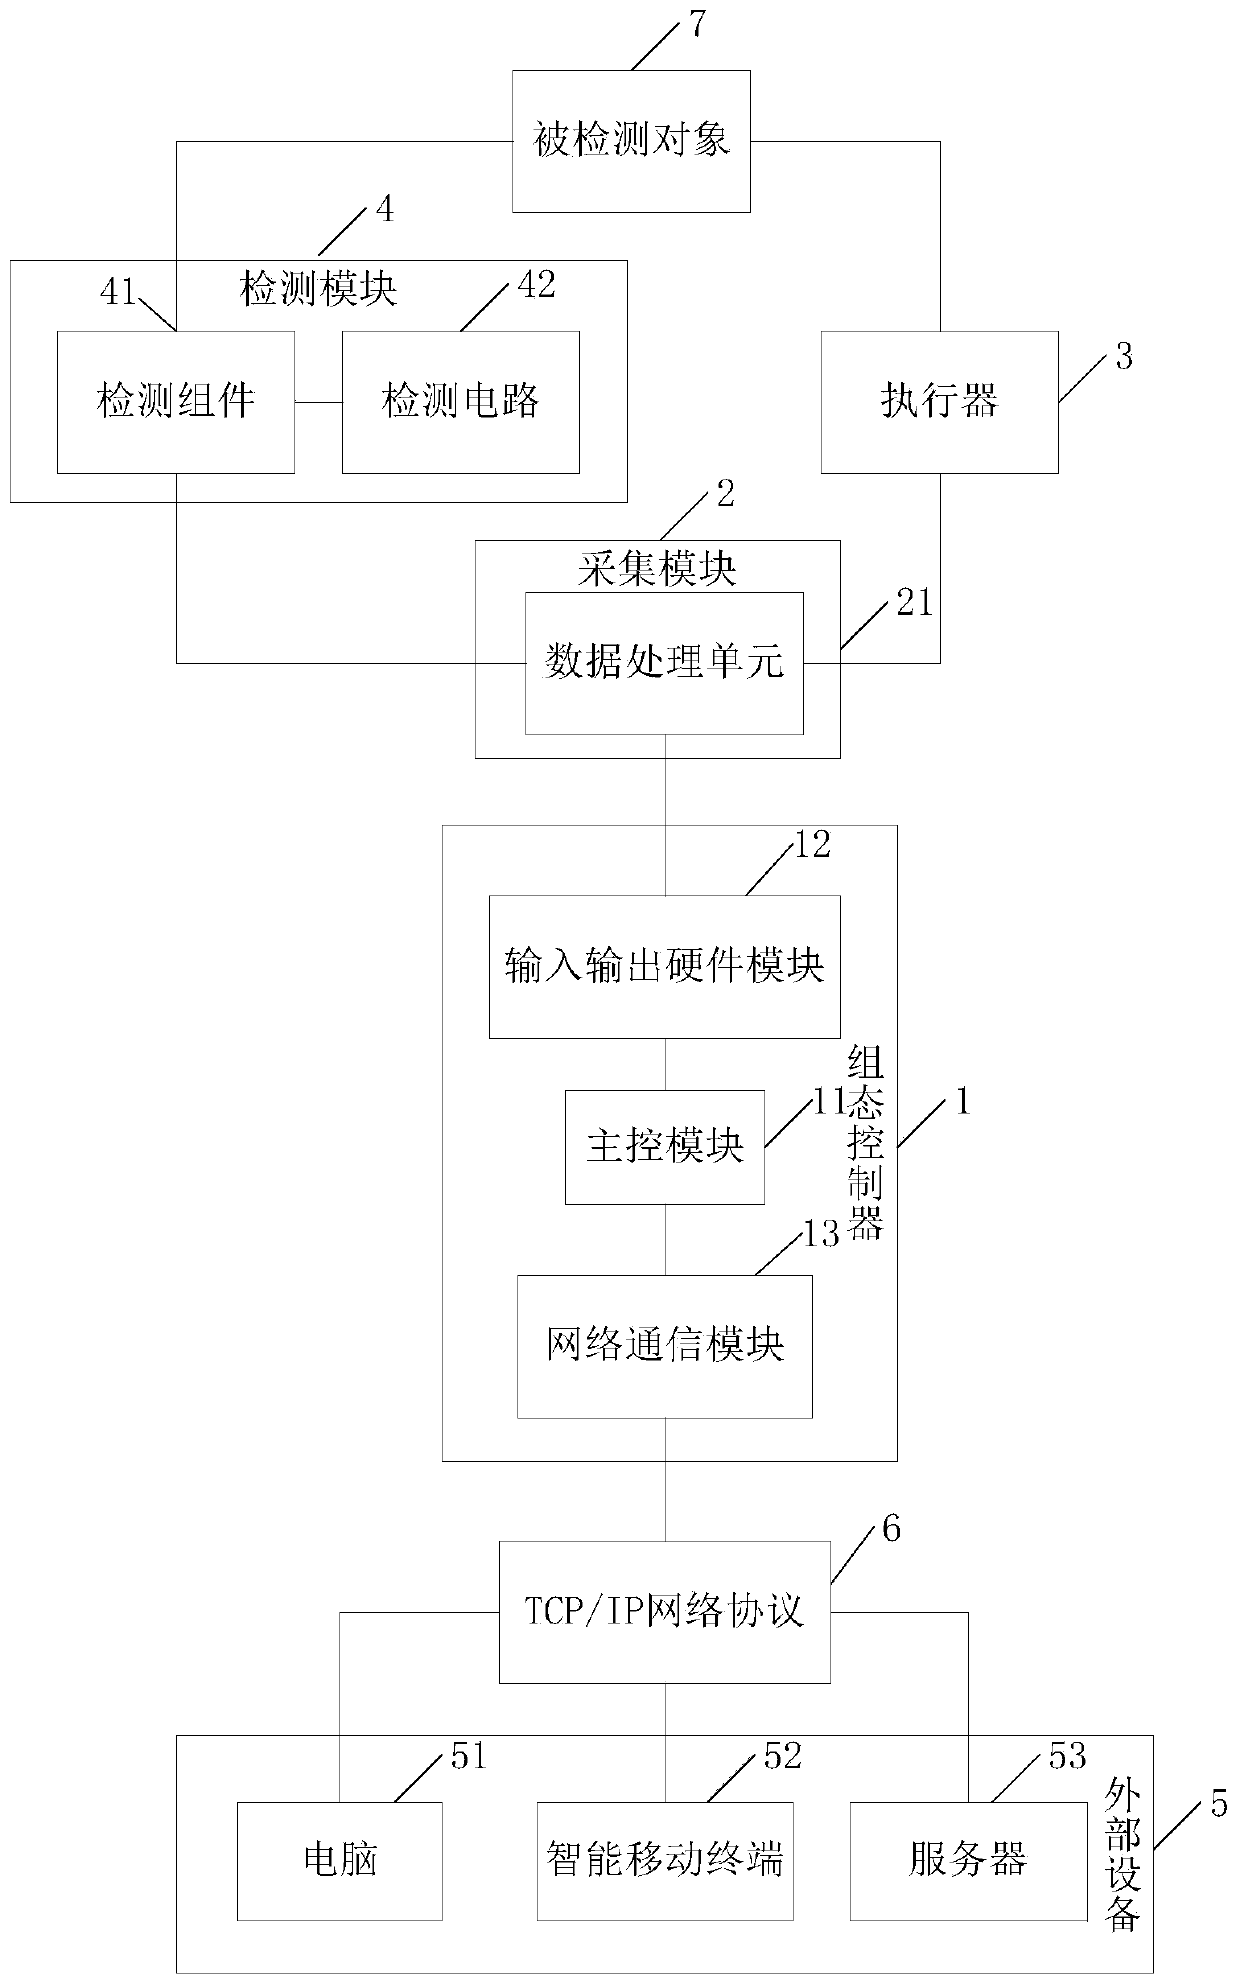 WEB-based configuration control system and method